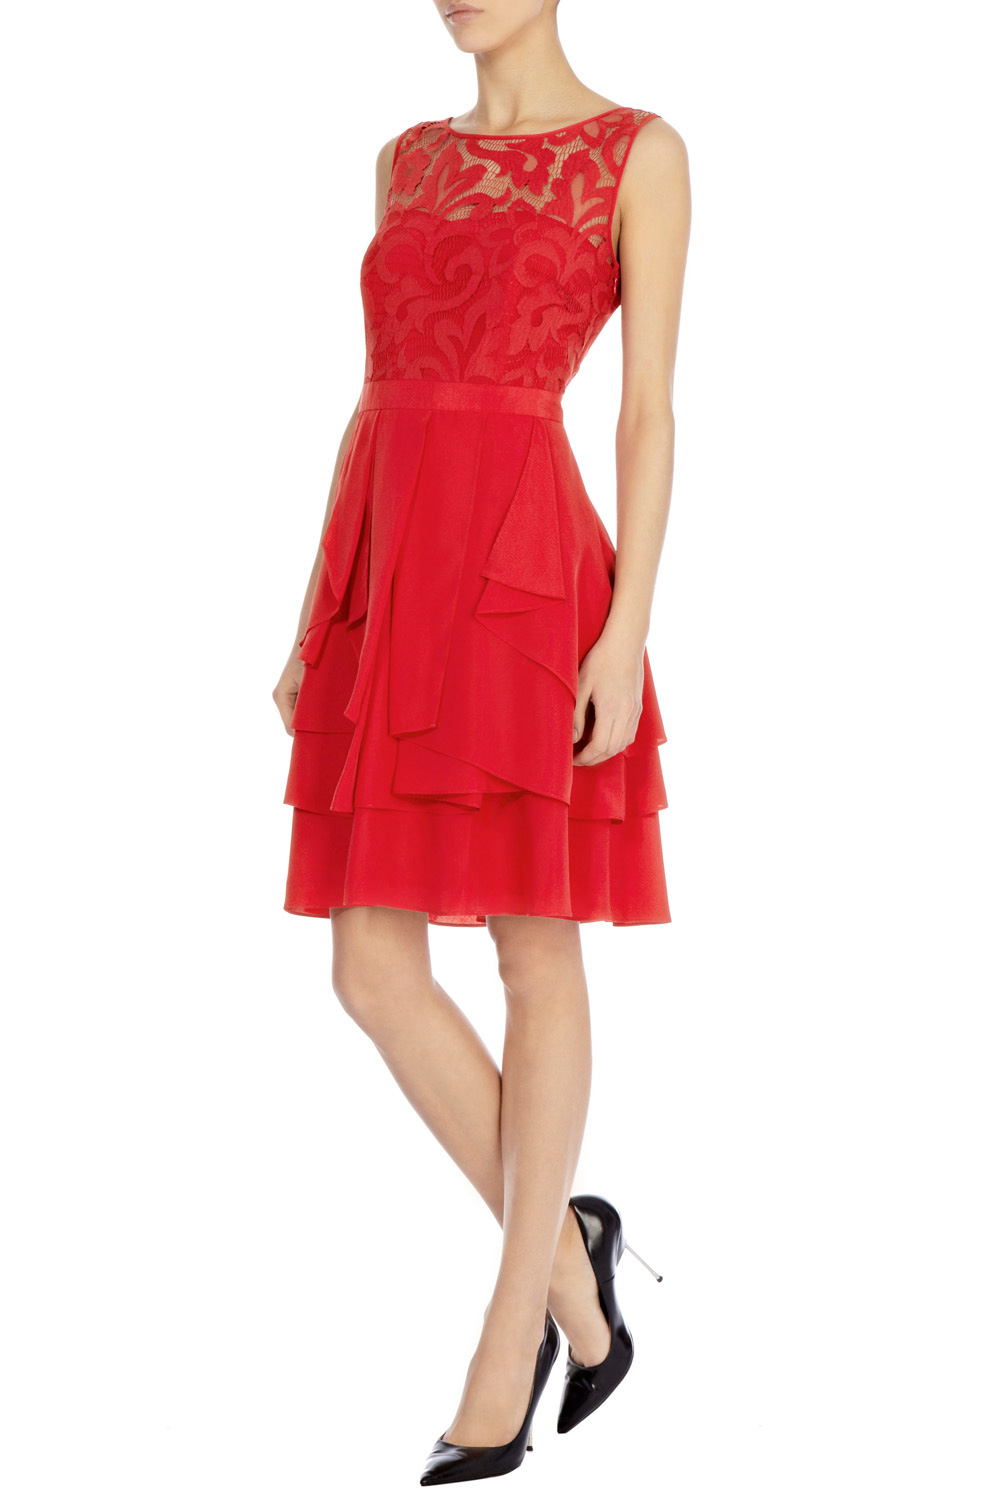 Coast Daymee Dress in Red (Reds) | Lyst